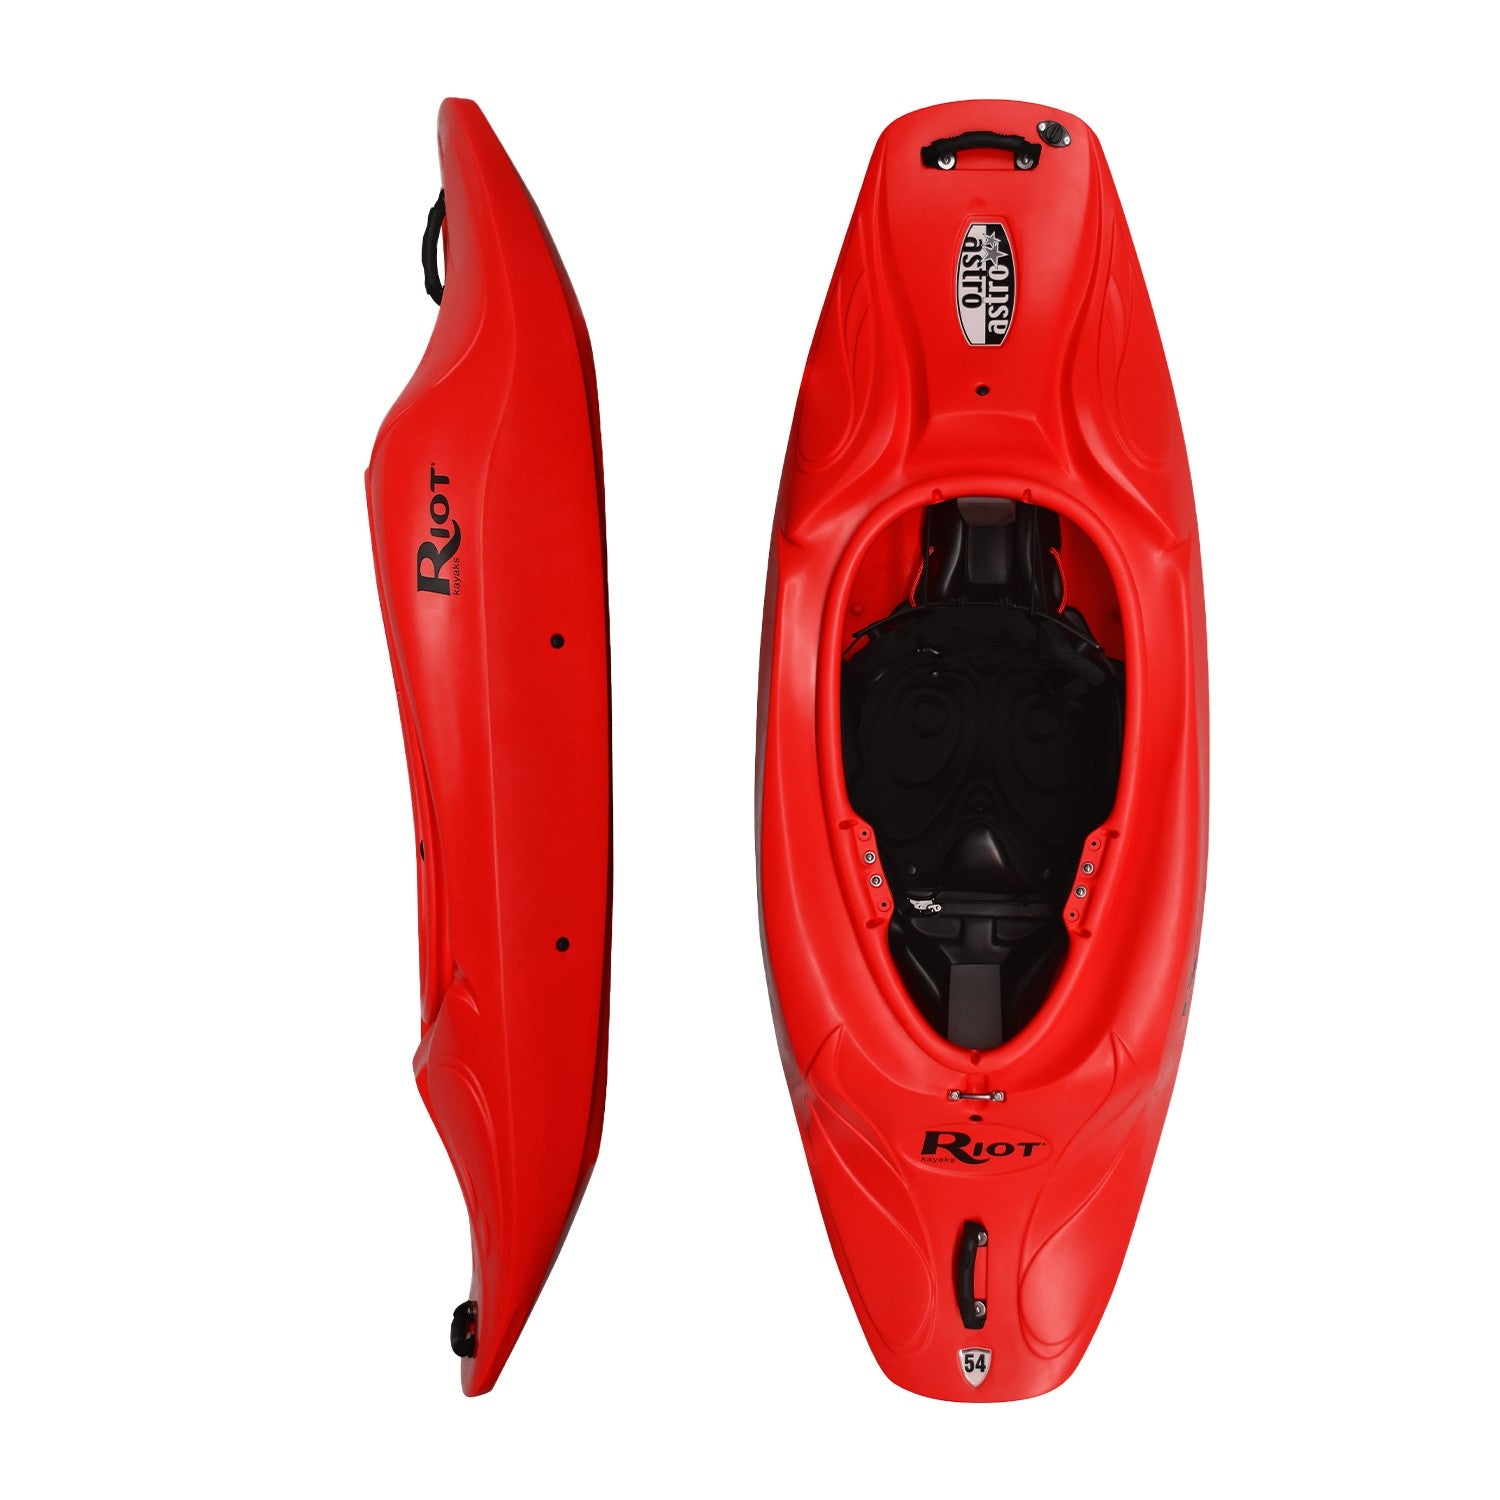 Astro 54 Kayak top and side view